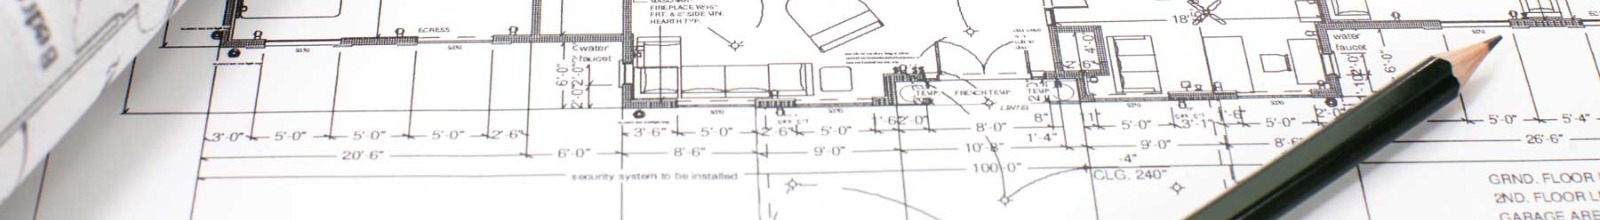 Image of Building Plans